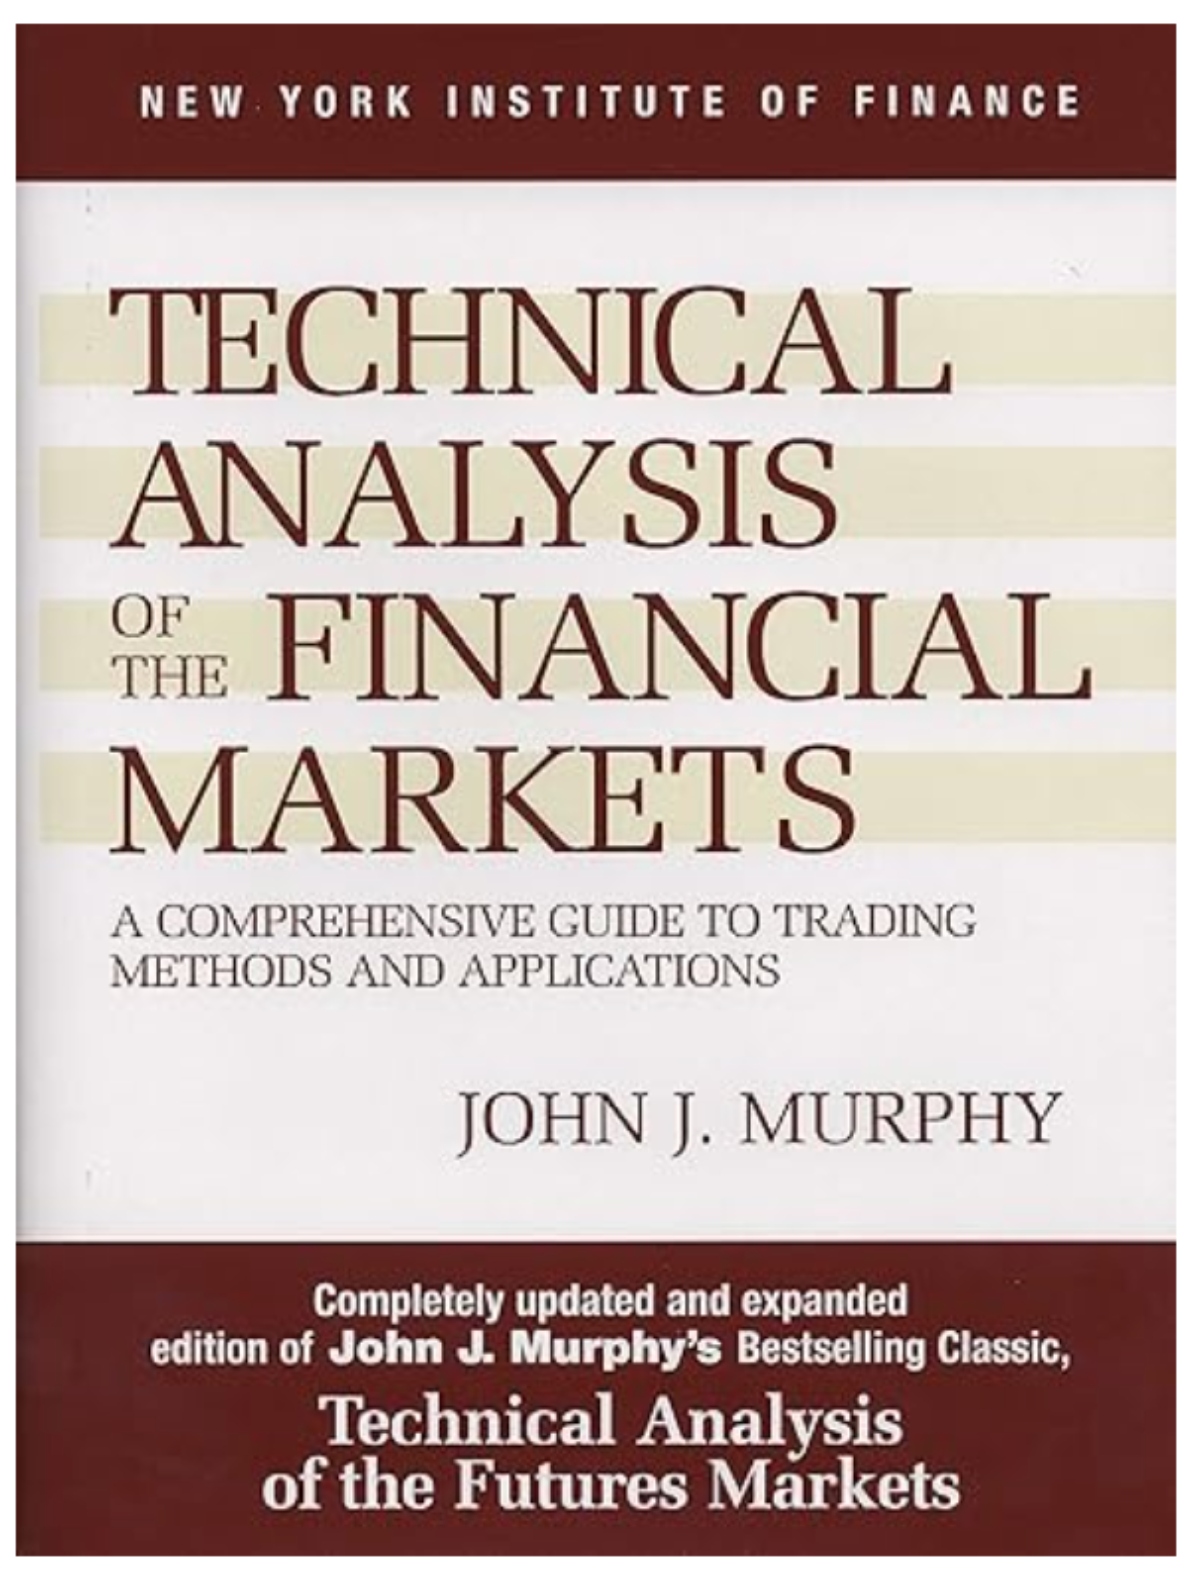 Good forex book for technical analysis